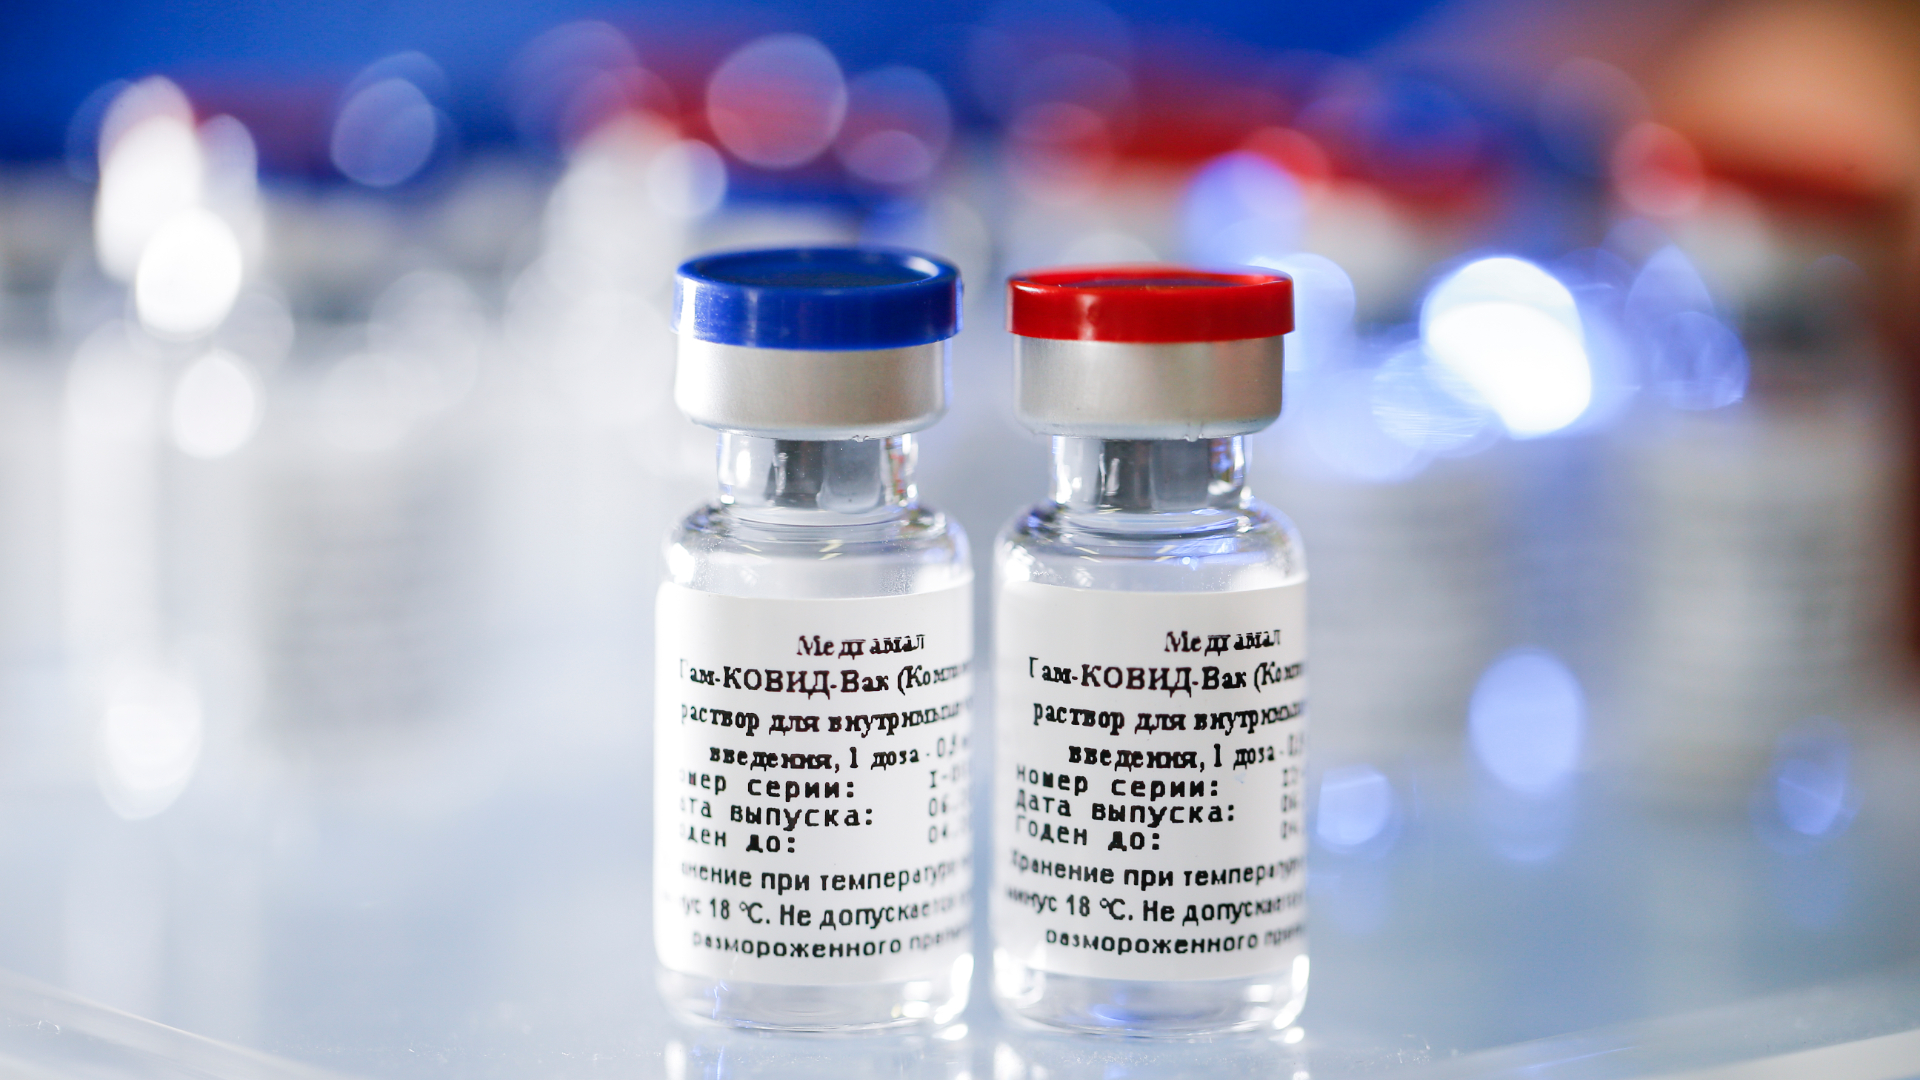 The first batch of the Russian vaccine, Sputnik V, will be made available to the population, assured the Russian Ministry of Health, according to TASS news agency. The vaccine has passed quality control tests and will soon be distributed throughout the country.